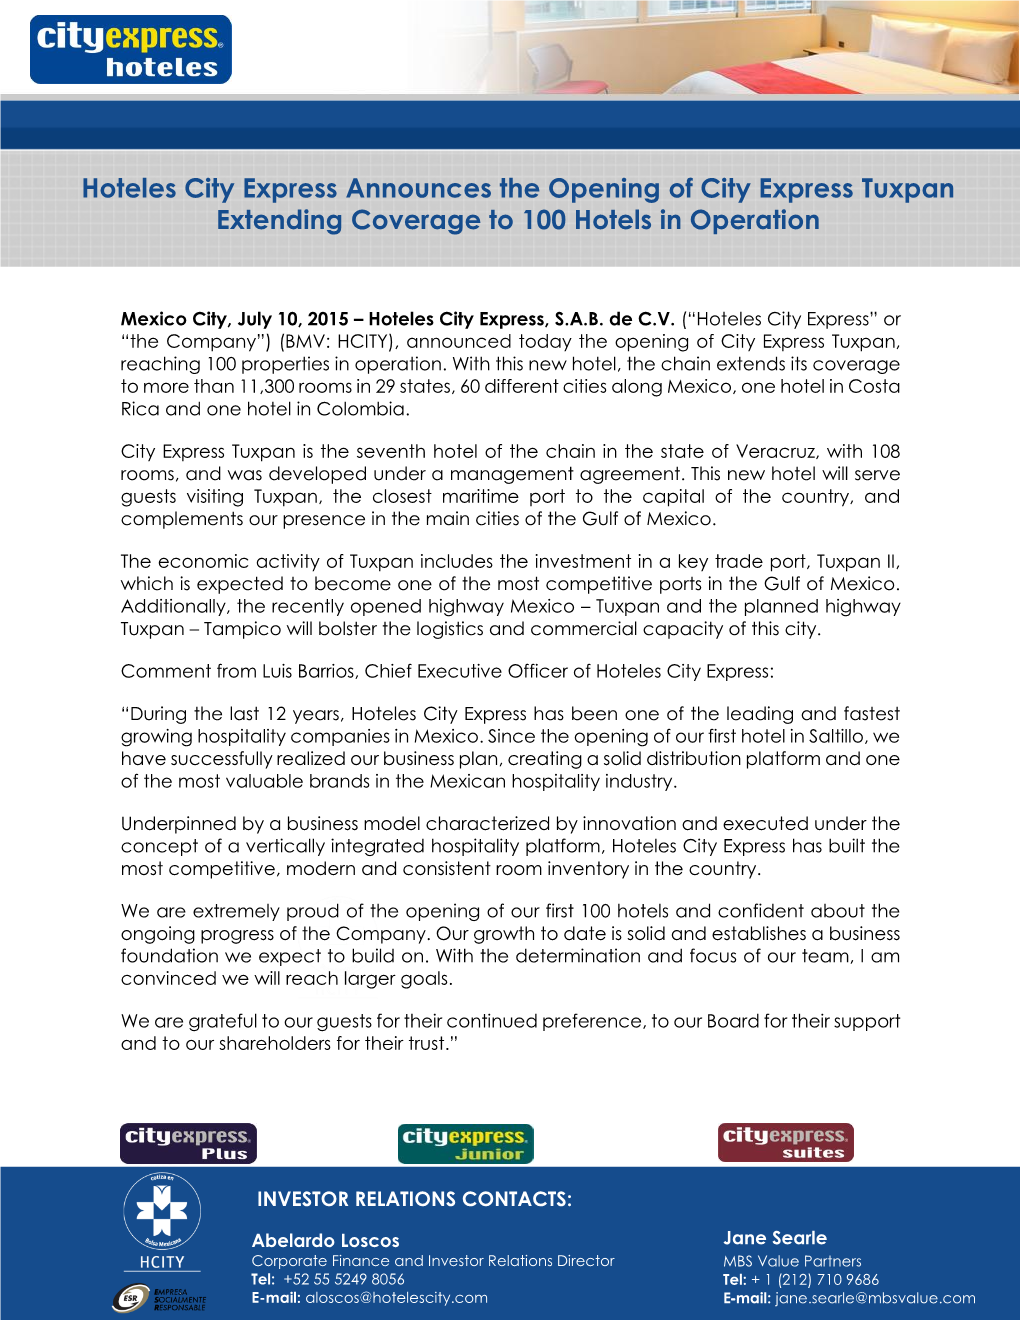 Hoteles City Express Announces the Opening of City Express Tuxpan